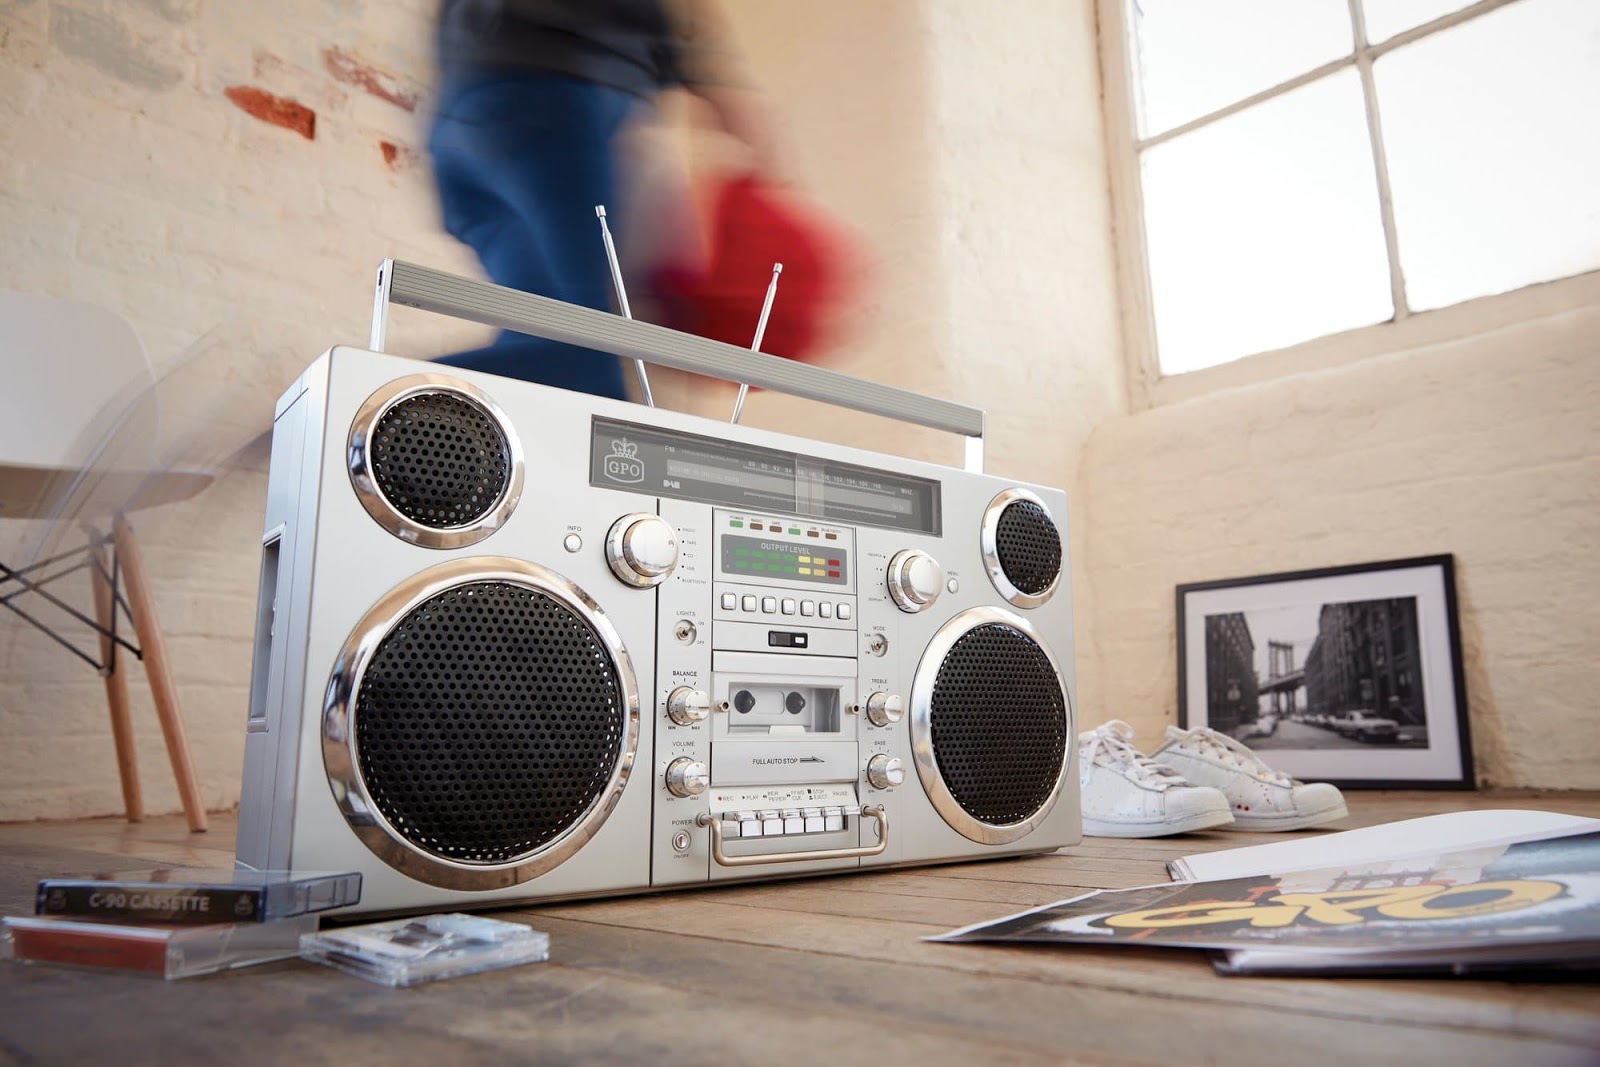 GPO Brooklyn Portable 1980s Retro Style Music System Boombox | Das Gadget des Tages 